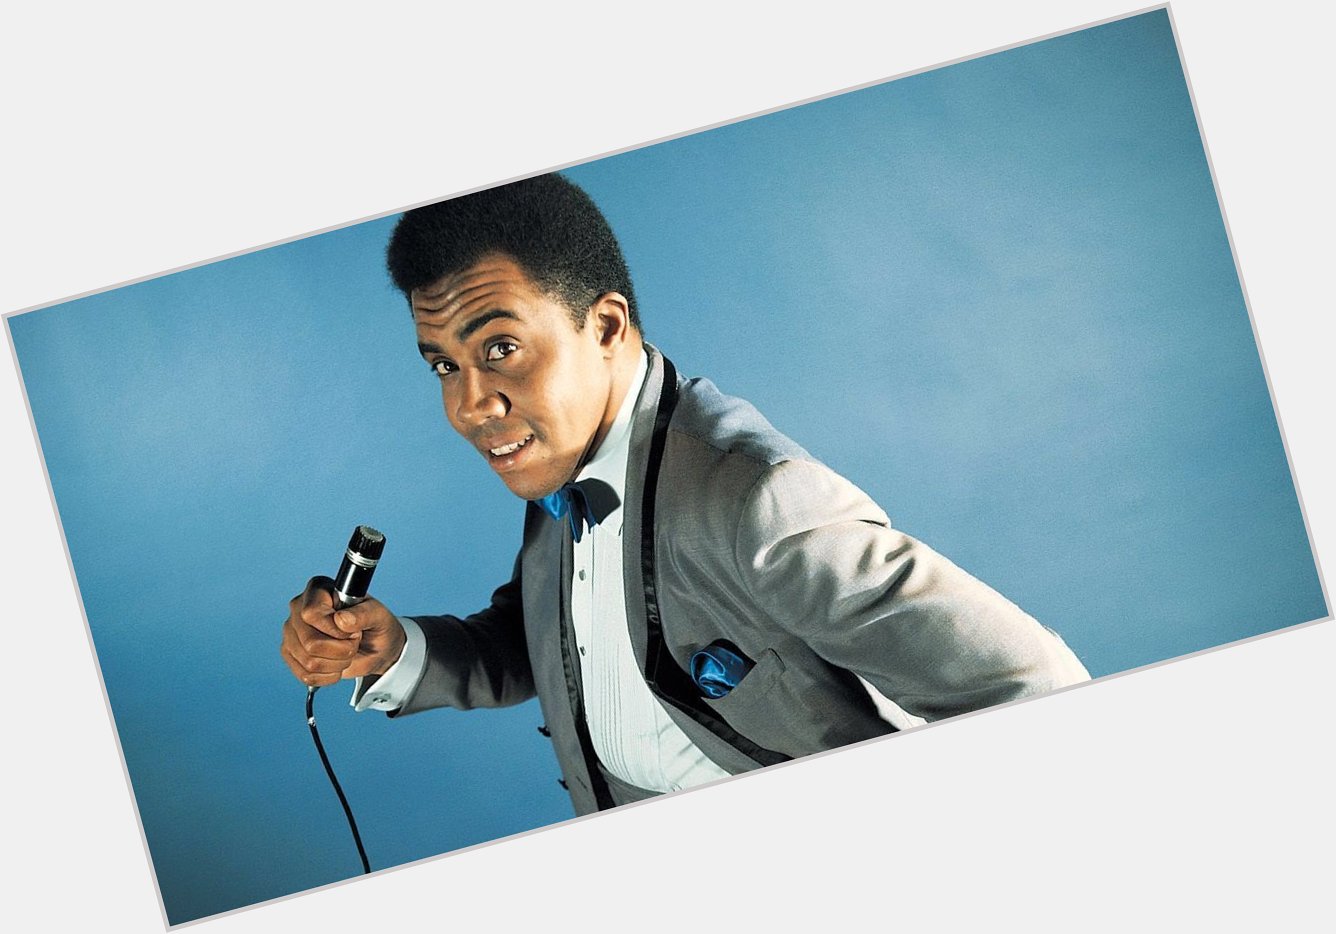 Happy birthday to Jimmy Ruffin who would have been 81 today. Continue to RIEP (May 7, 1936 November 17, 2014)  